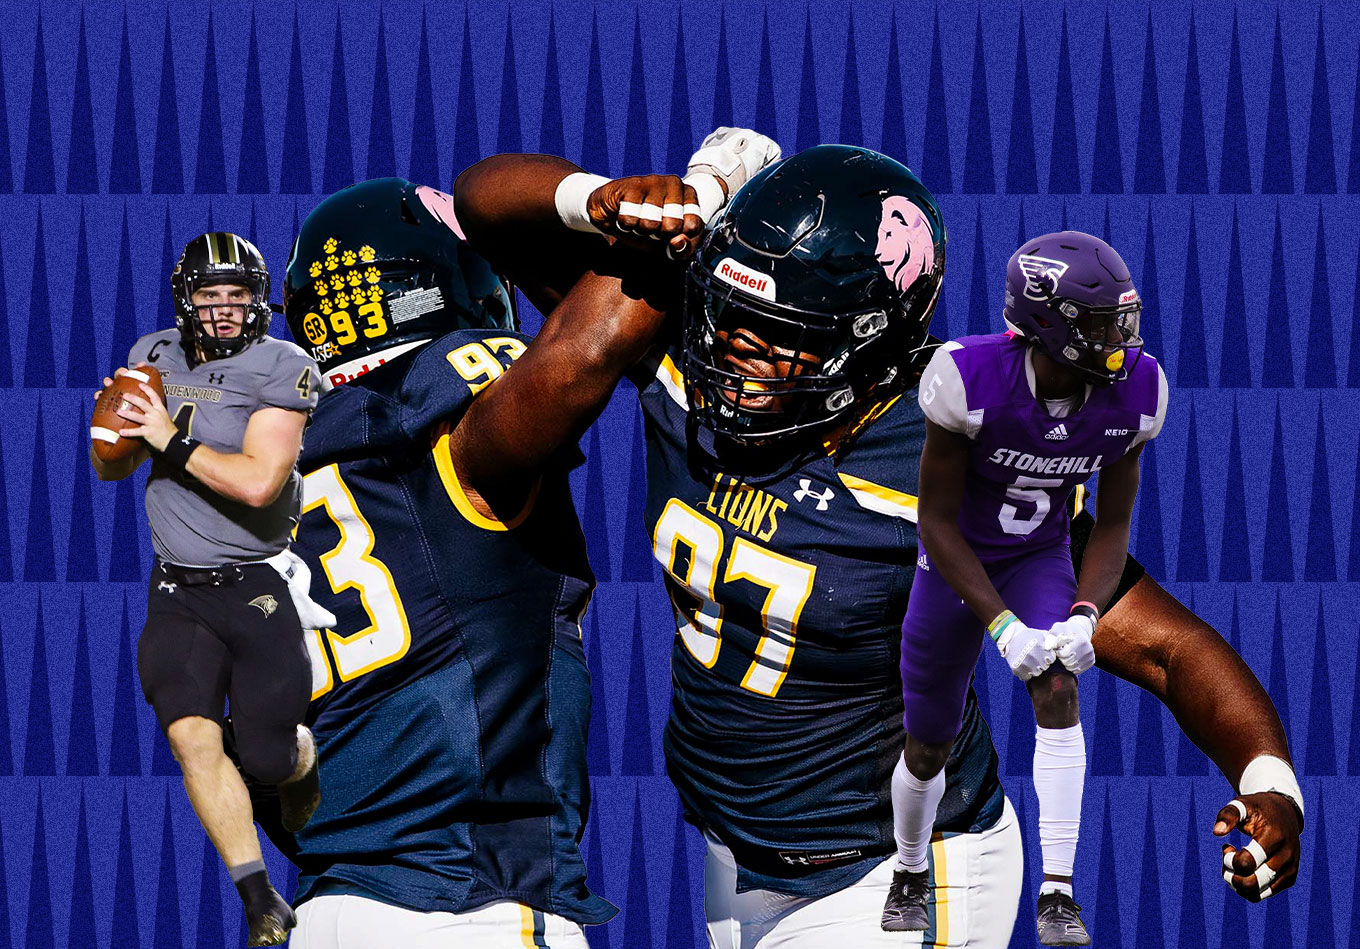 Meet the New FCS Football Programs in 2022: Lindenwood, Stonehill and Texas A&M-Commerce